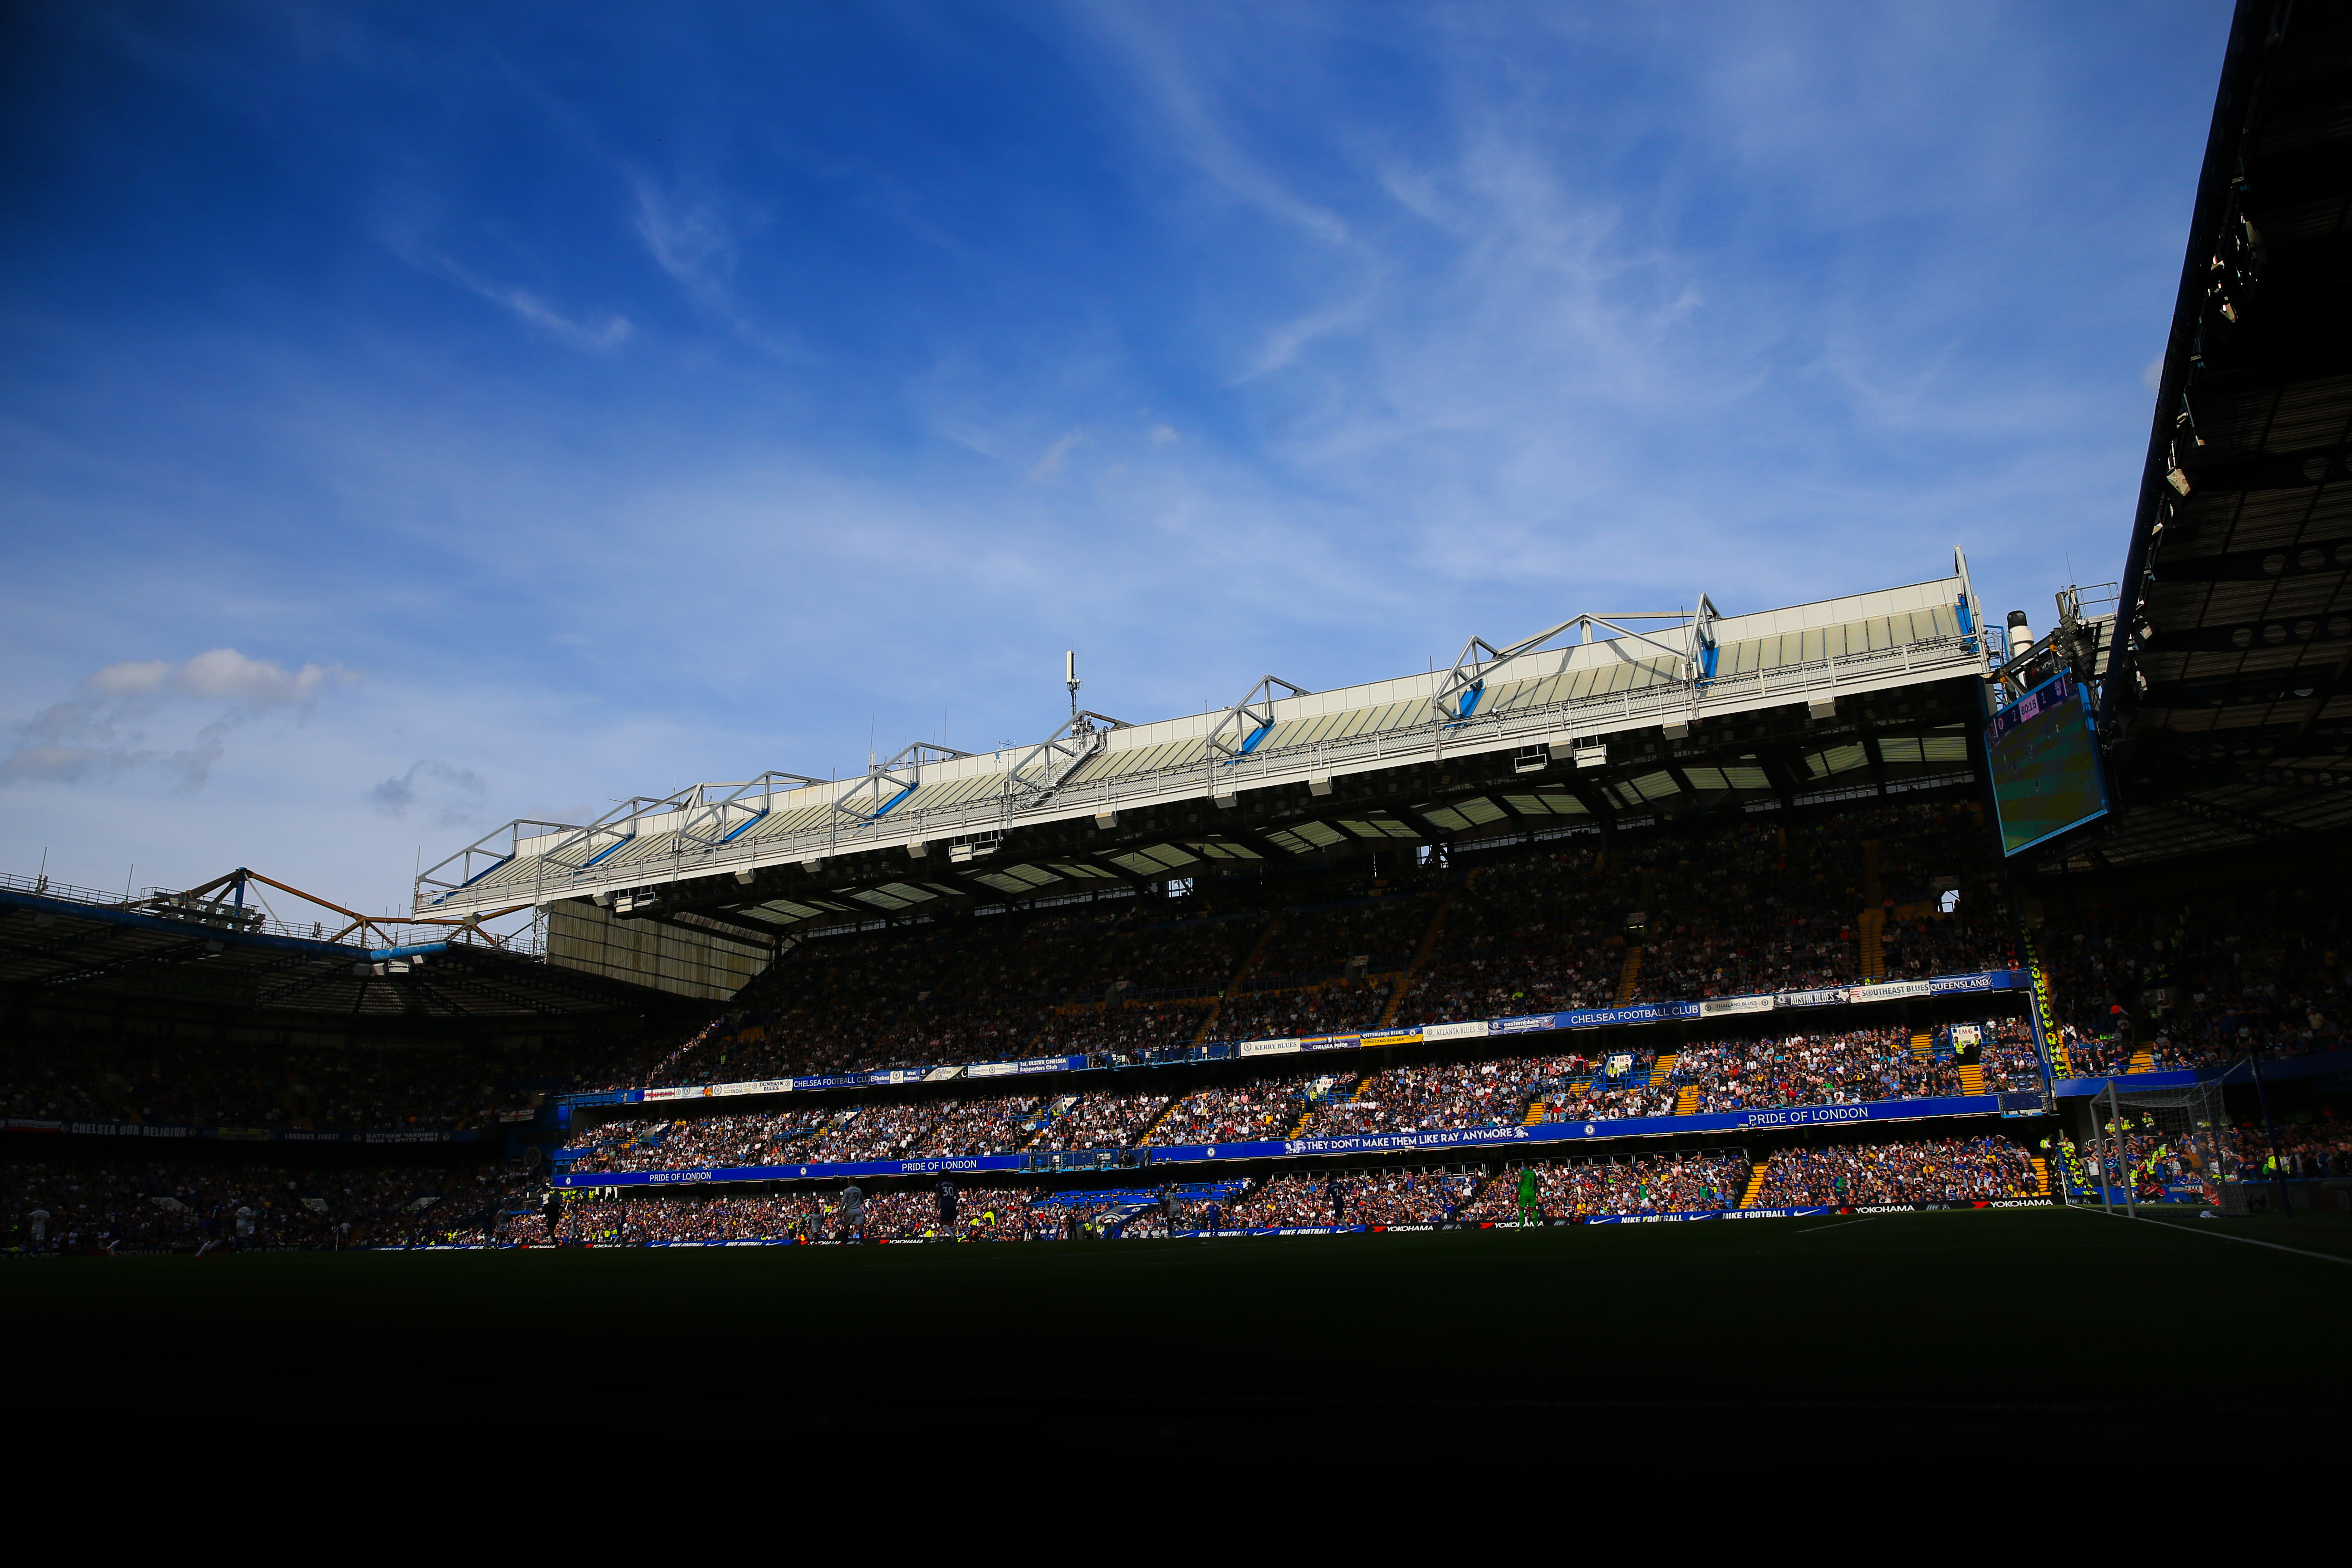 LONDON, ENGLAND - SEPTEMBER 15: A general view of Stamford Bridge during the Premier League match between Chelsea FC and Cardiff City at Stamford Bridge on September 15, 2018 in London, United Kingdom. (Photo by Marc Atkins/Getty Images)